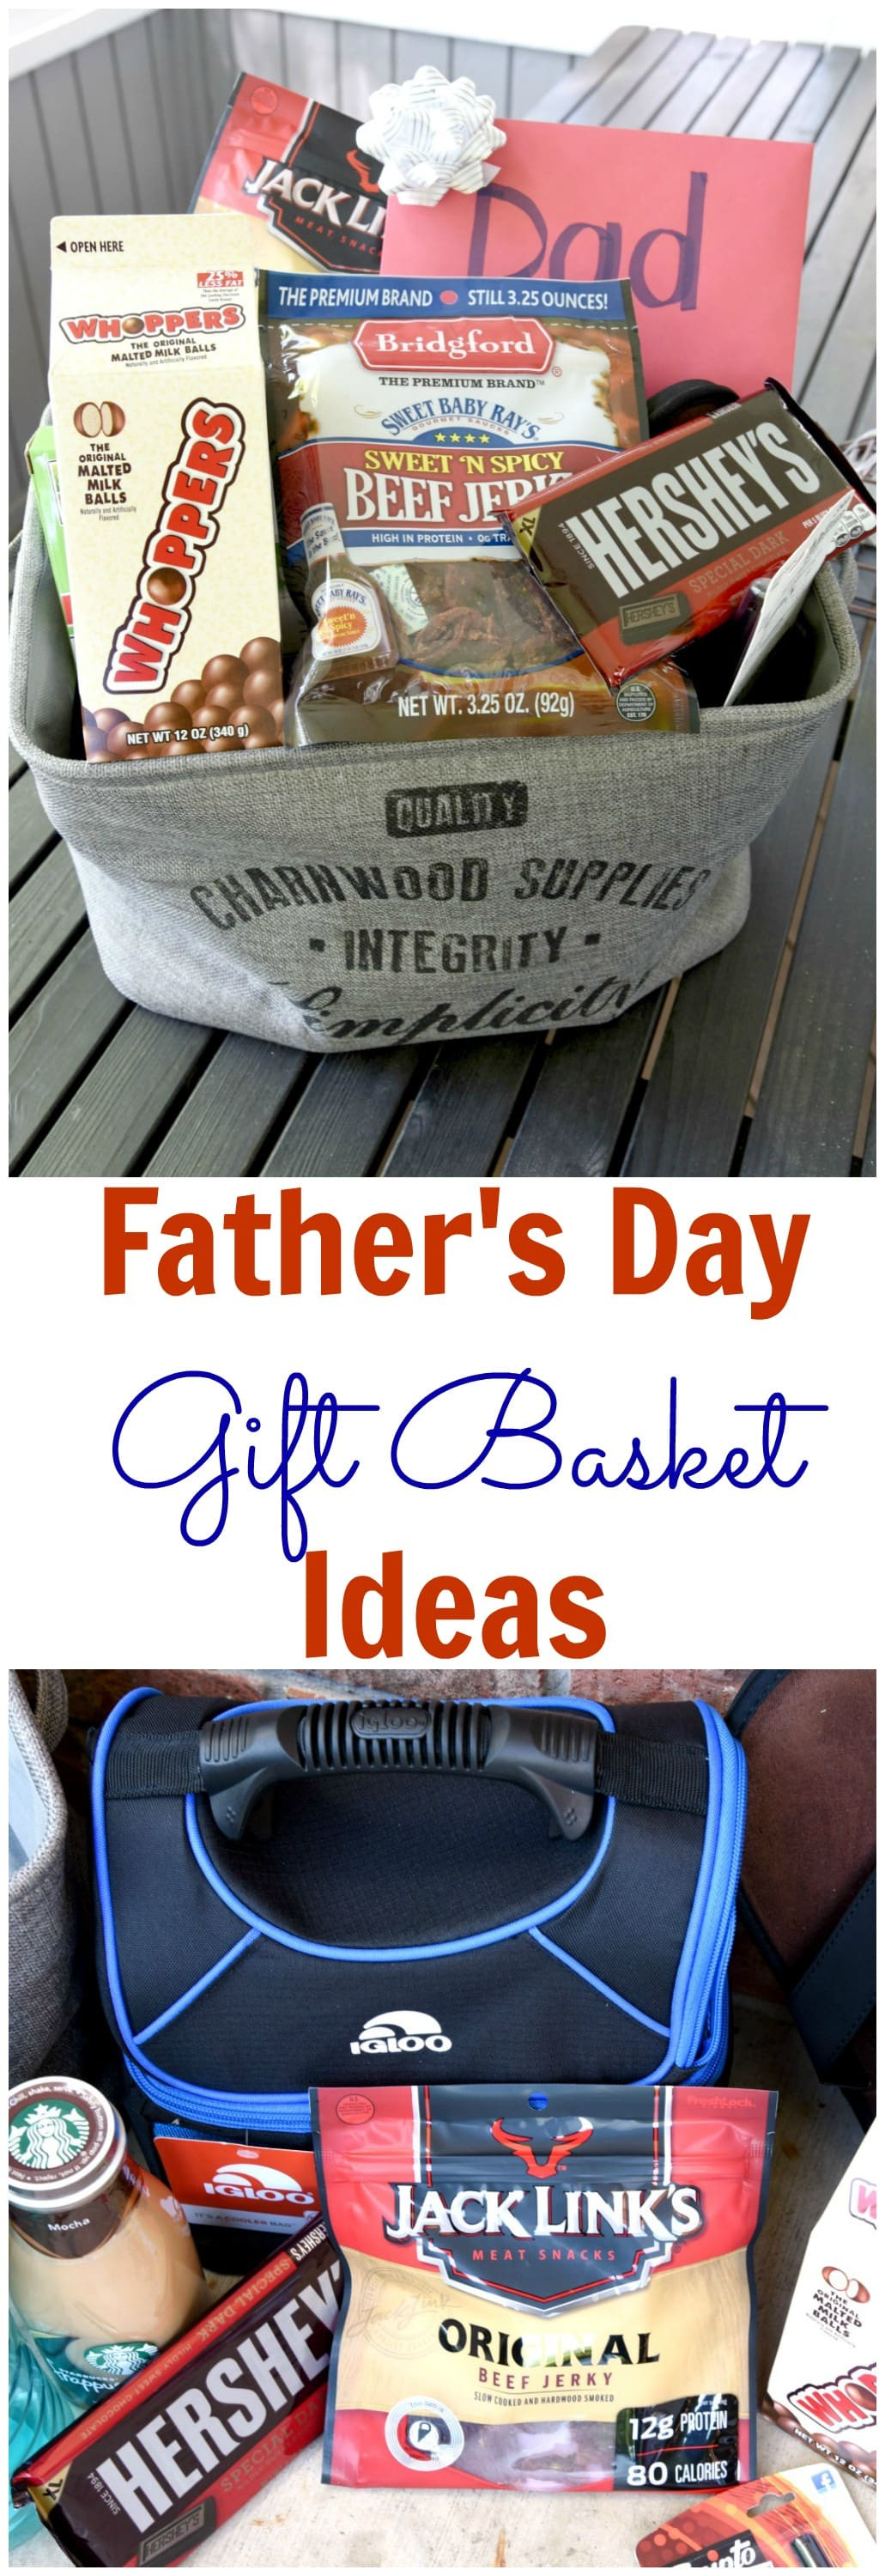 Father Day Gift Basket Ideas
 Tips to Create a Father s Day Gift Basket Dad will Love